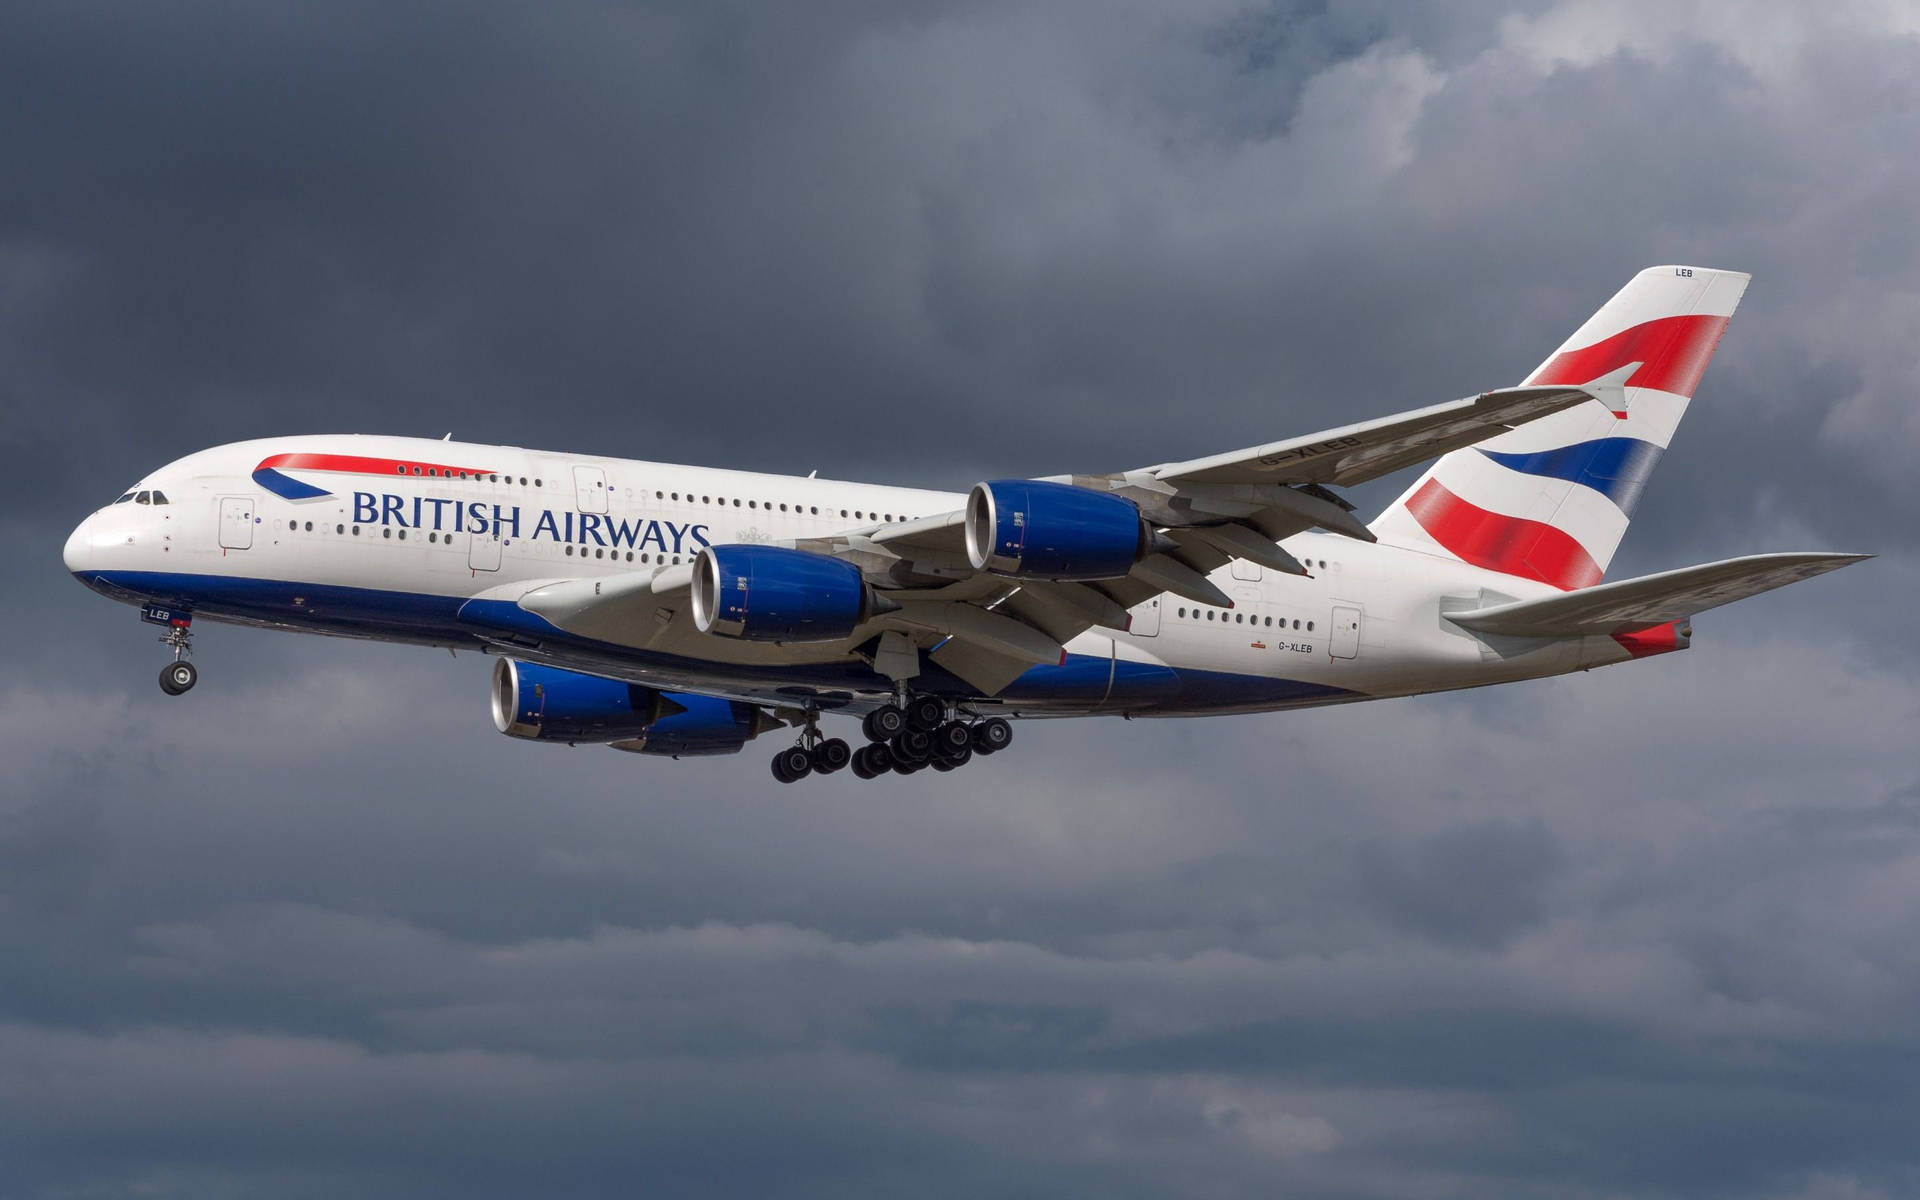 Airplane From British Airways With Overcast Sky Wallpaper